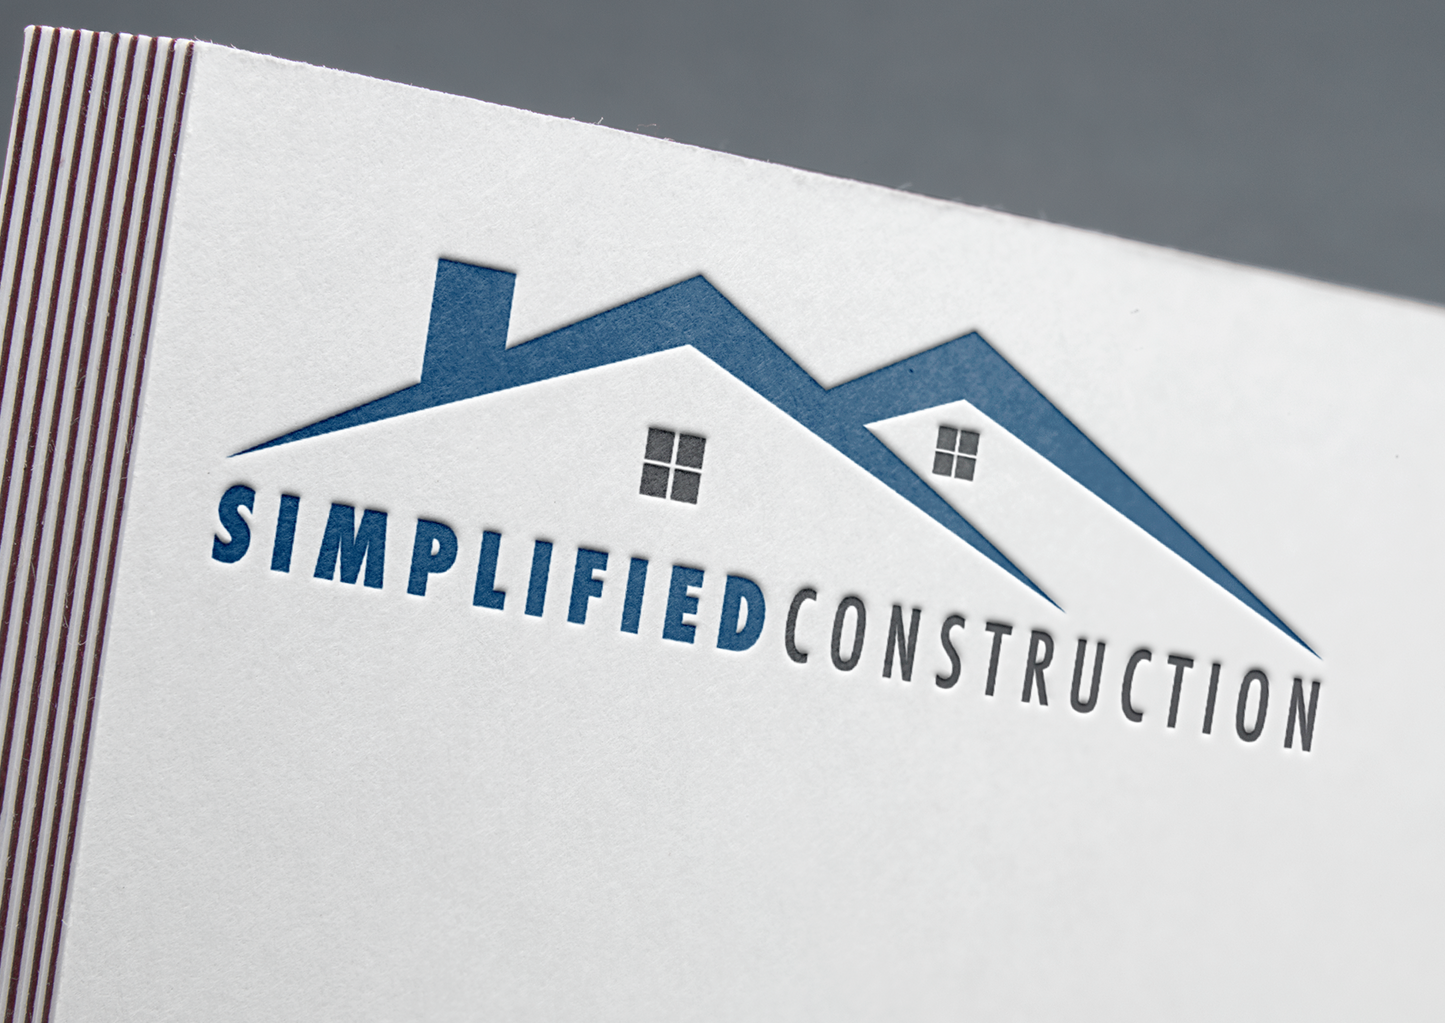 Construction Logo | Roofing Business | Real Estate Logo | Real Estate Business | Construction Company | Roofing Logo | Roofers | Real Estate Agent